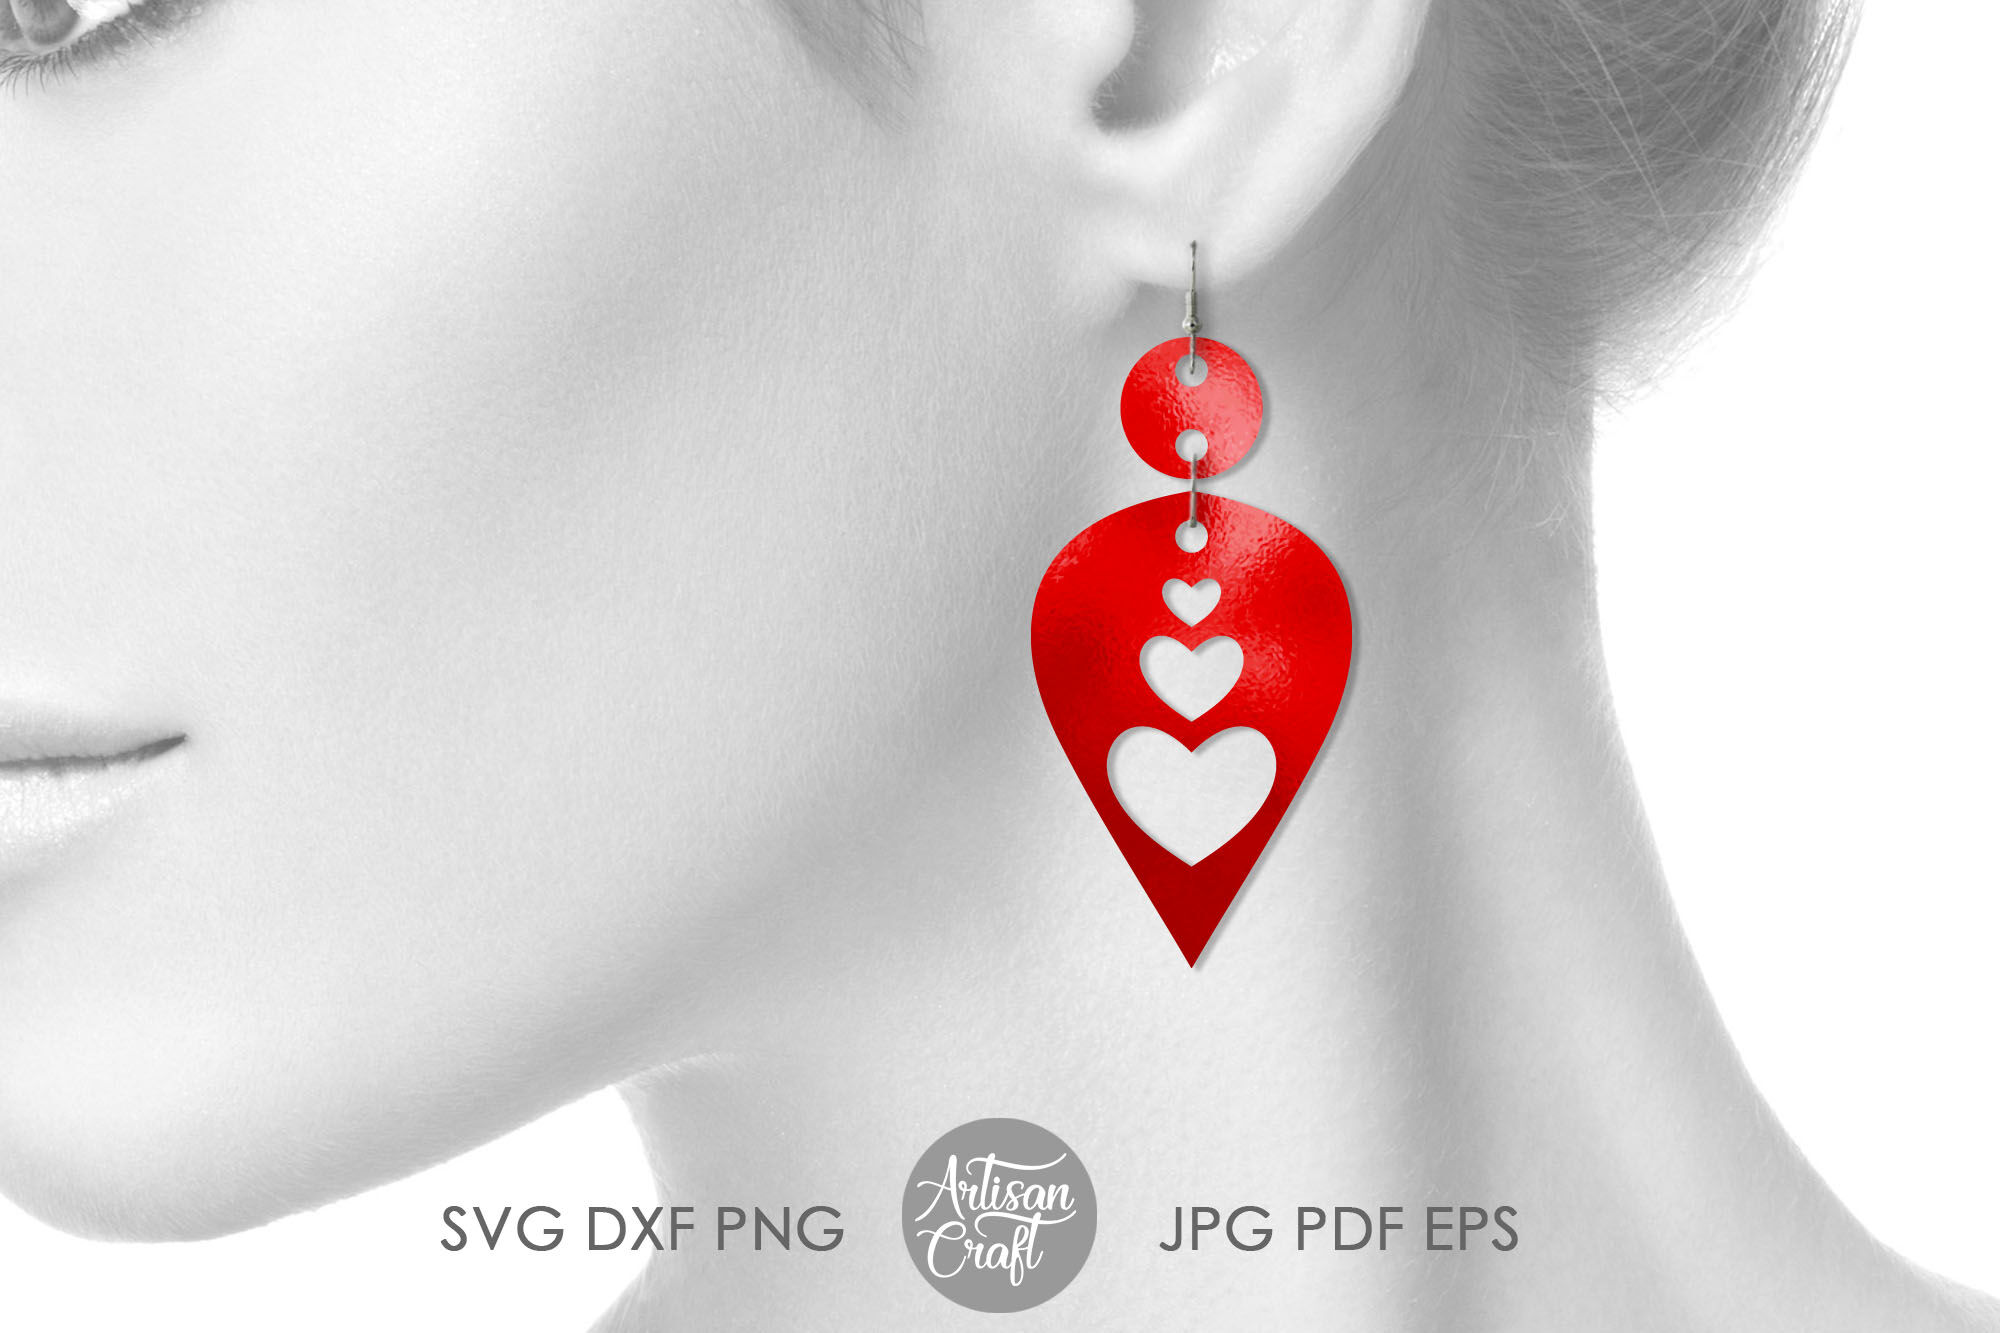 Valentines earrings, SVG cut file, heart earrings SVG By Artisan Craft SVG